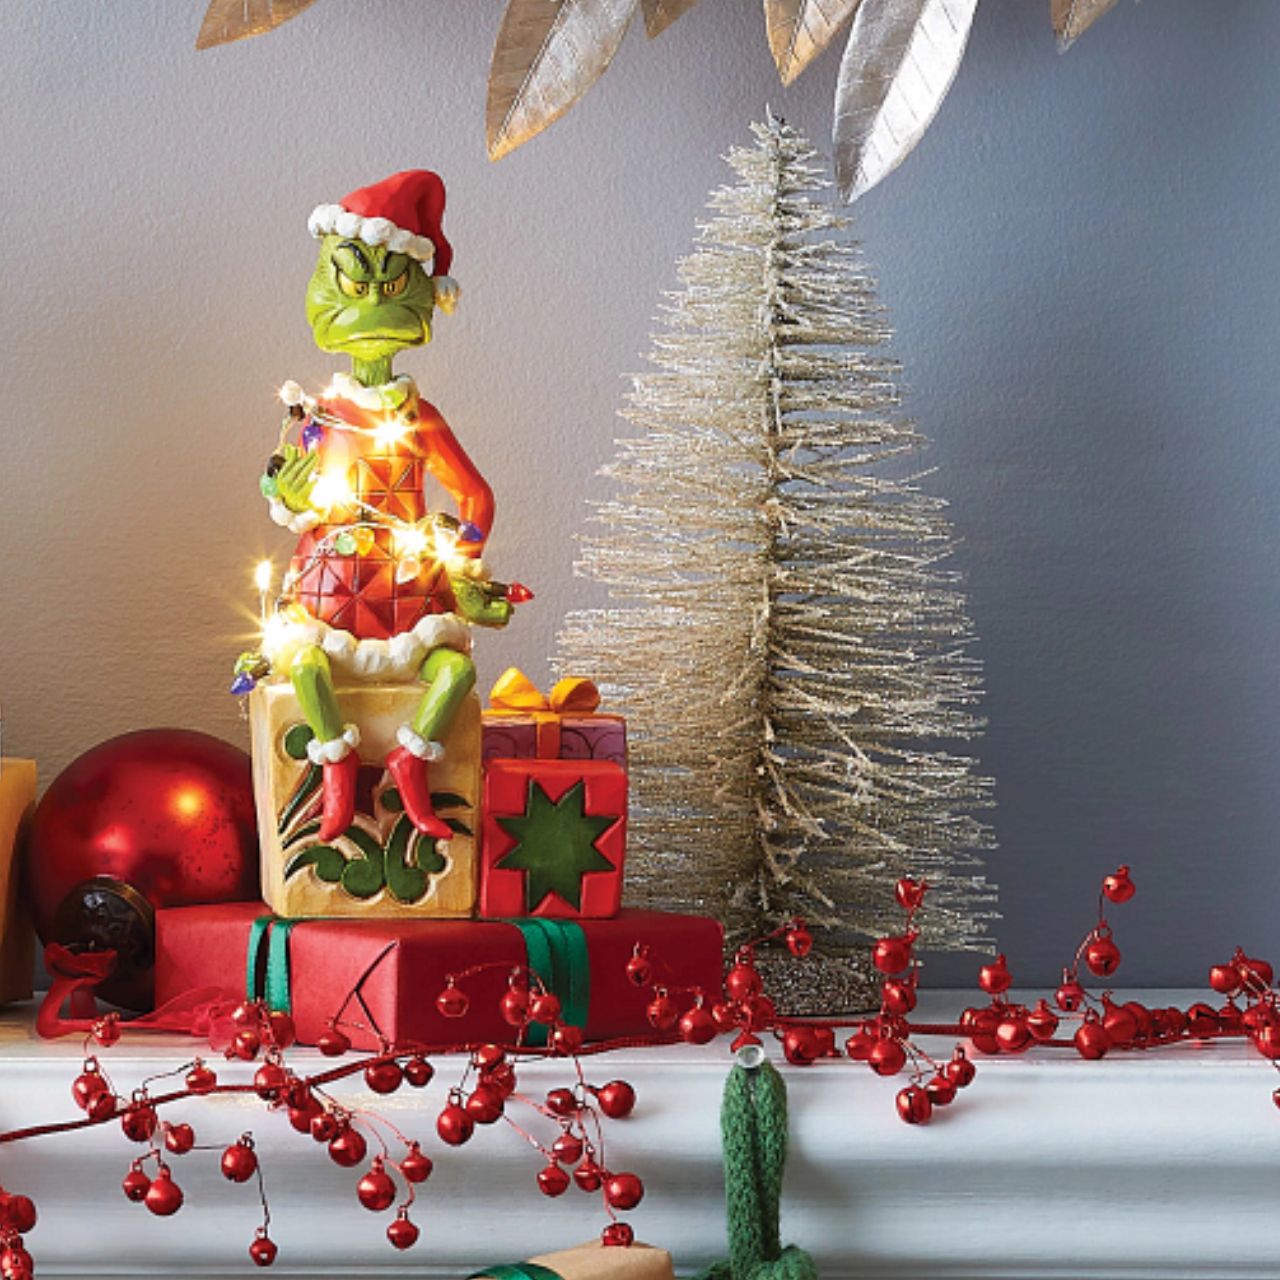 Grinch with lights Figurine - The Grinch  With a grimace on his green grouchy face, the Grinch, by Jim Shore, finds himself wrapped in a glowing string of lights as he tries to ruin the holiday.